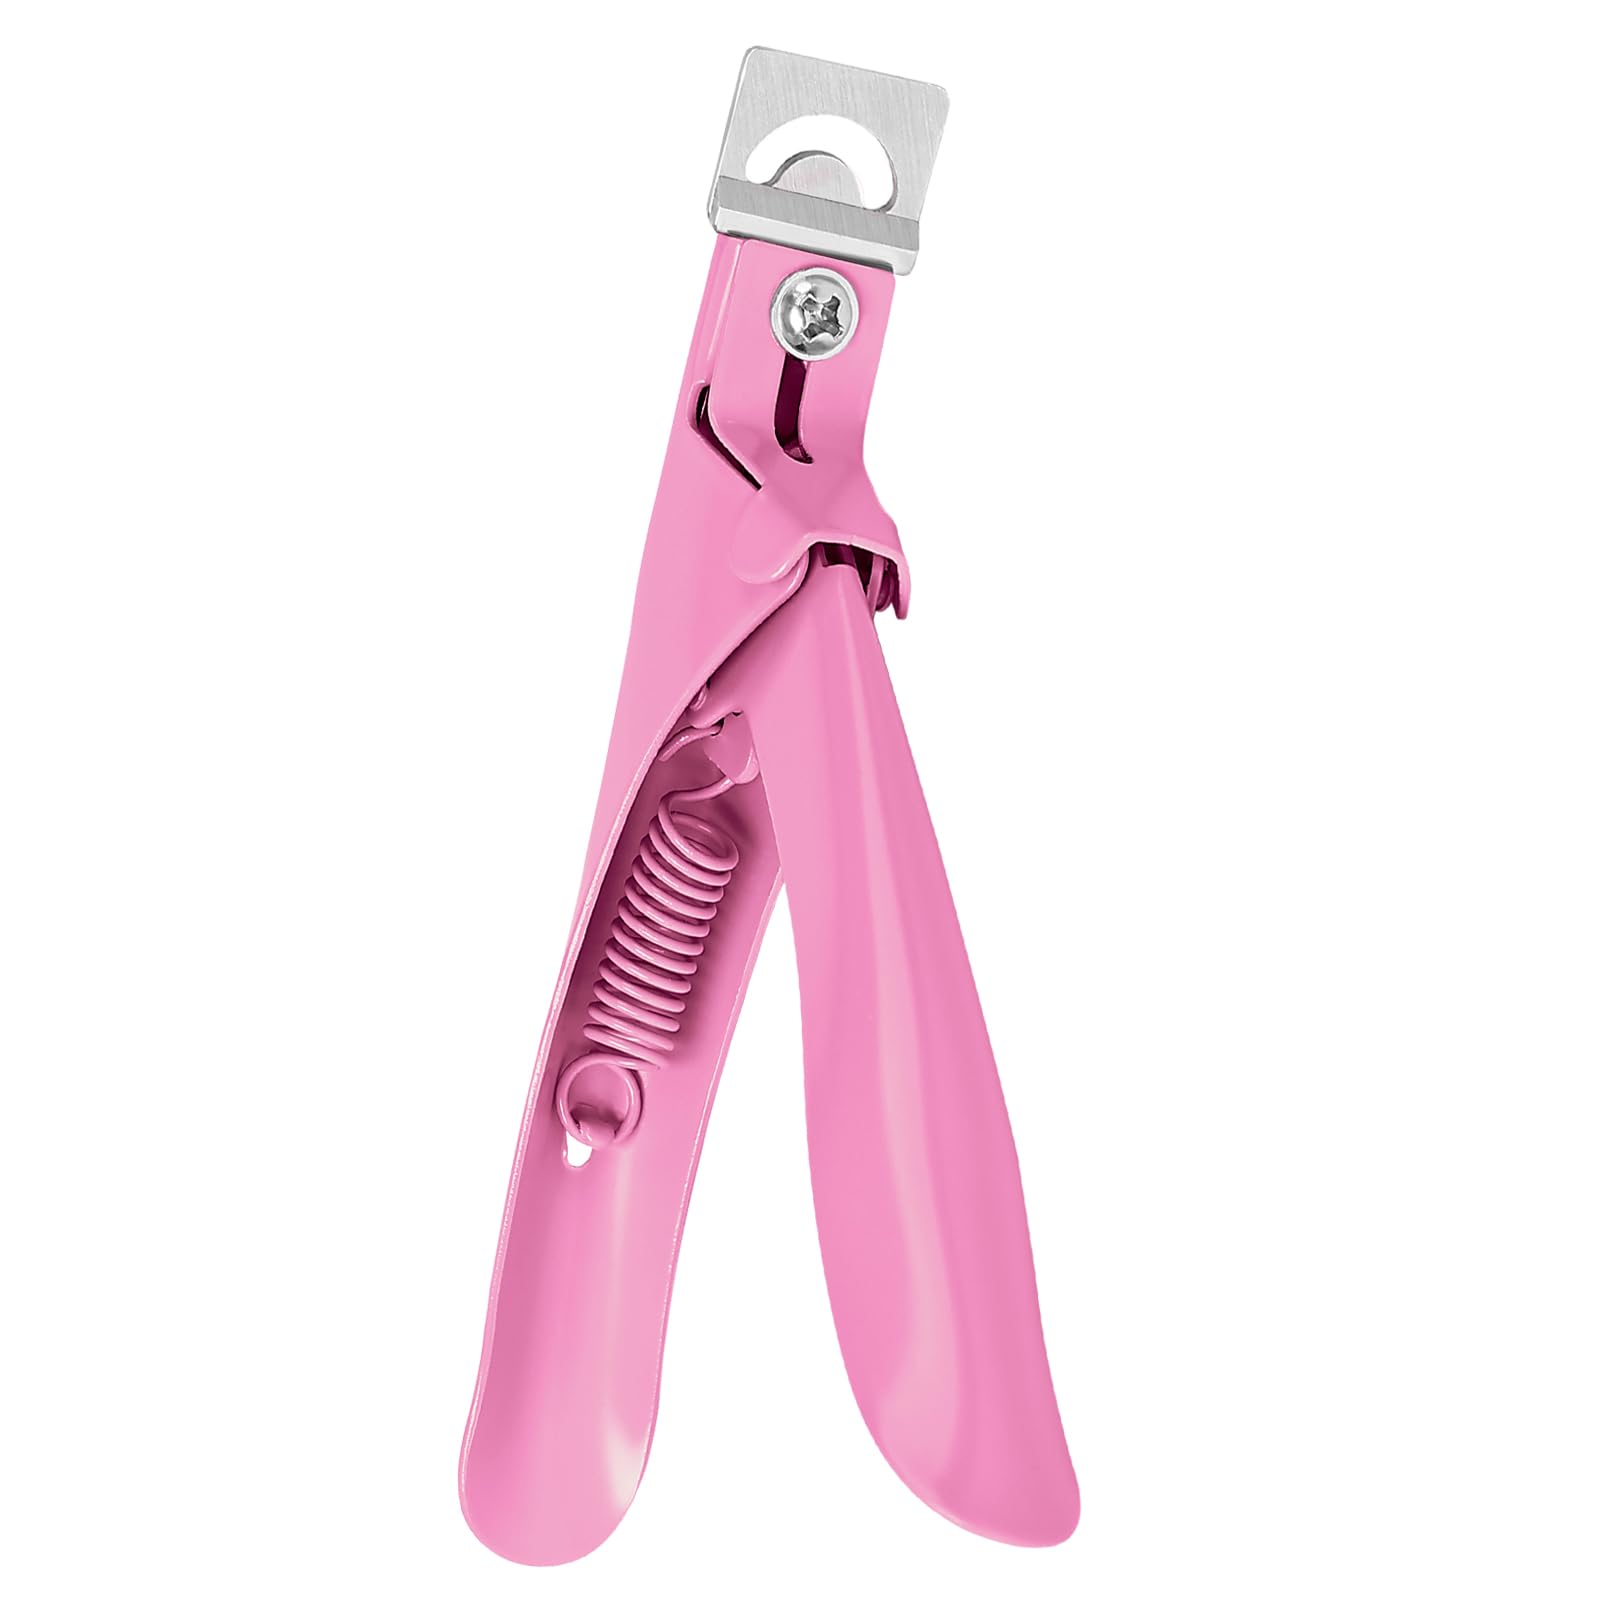 Professional Adjustable Acrylic False Nail Clippers for Acrylic